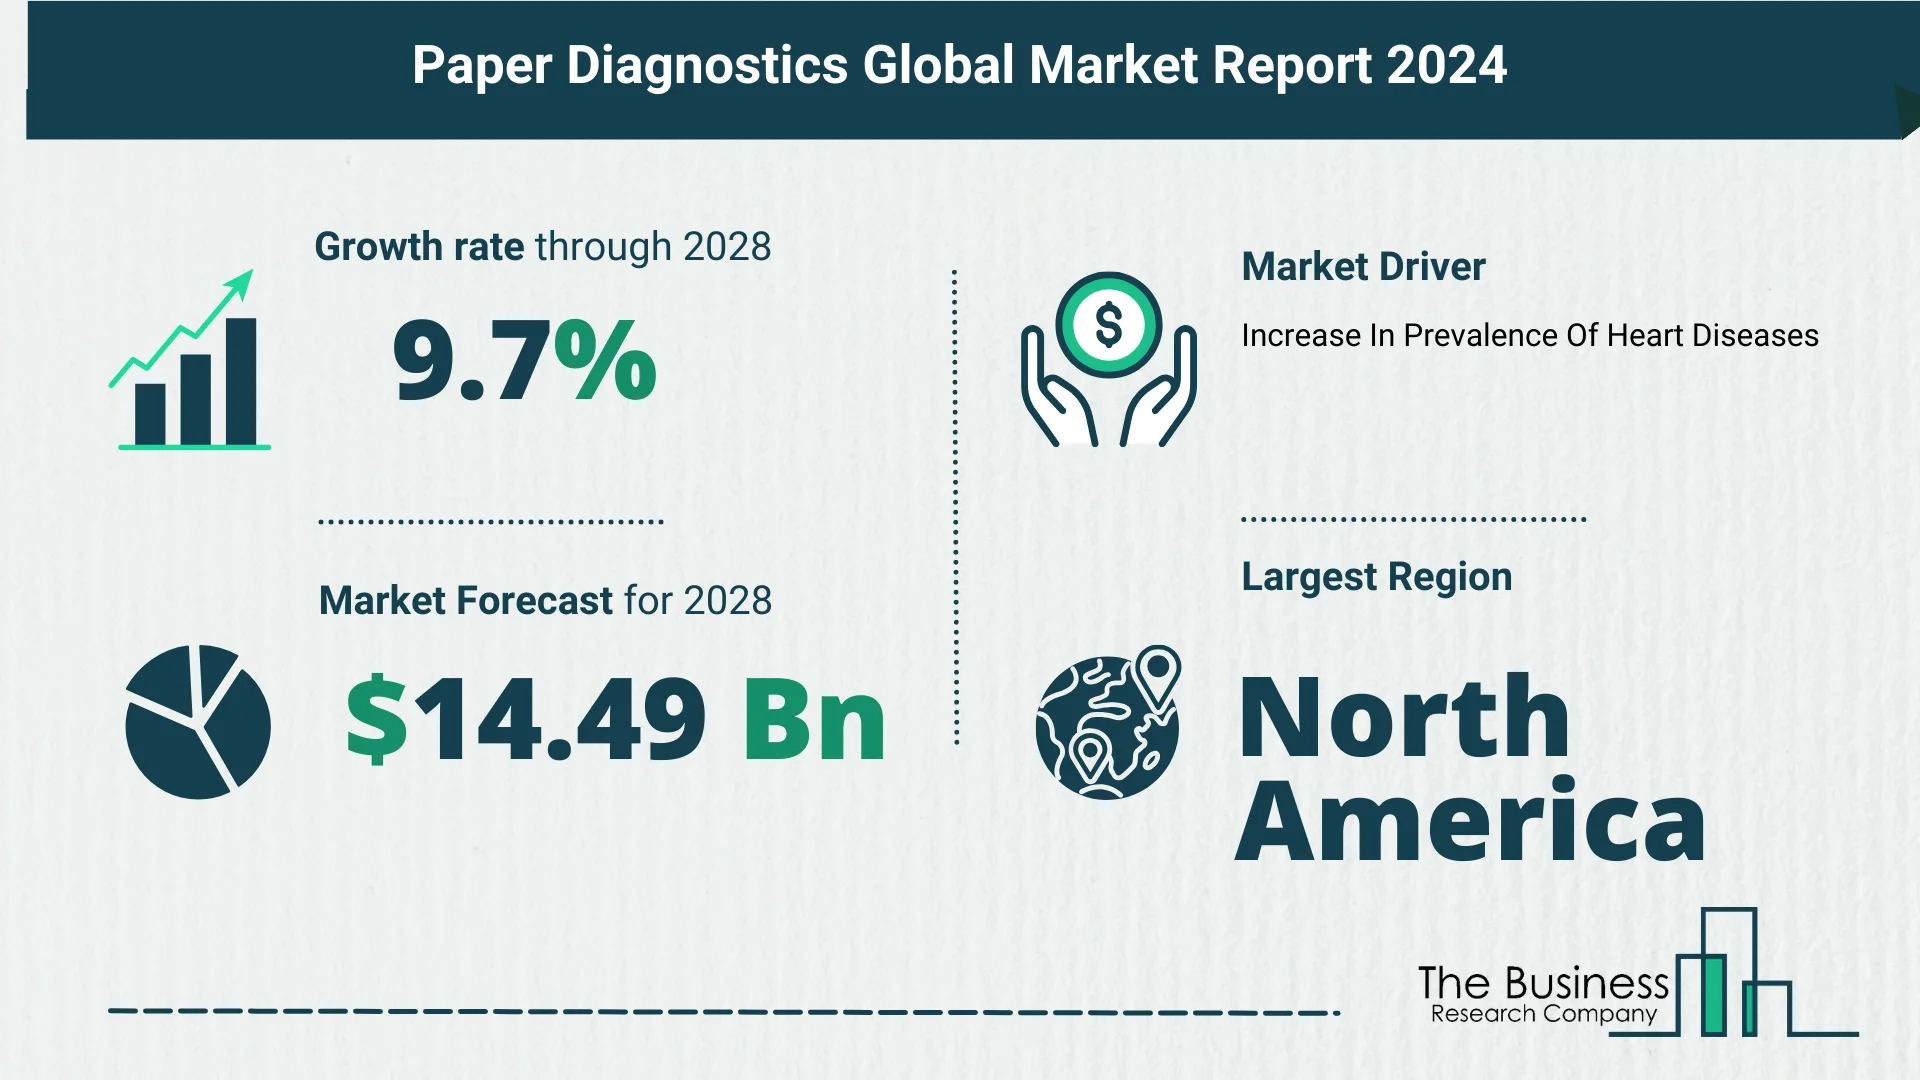 How Is The Paper Diagnostics Market Expected To Grow Through 2024-2033